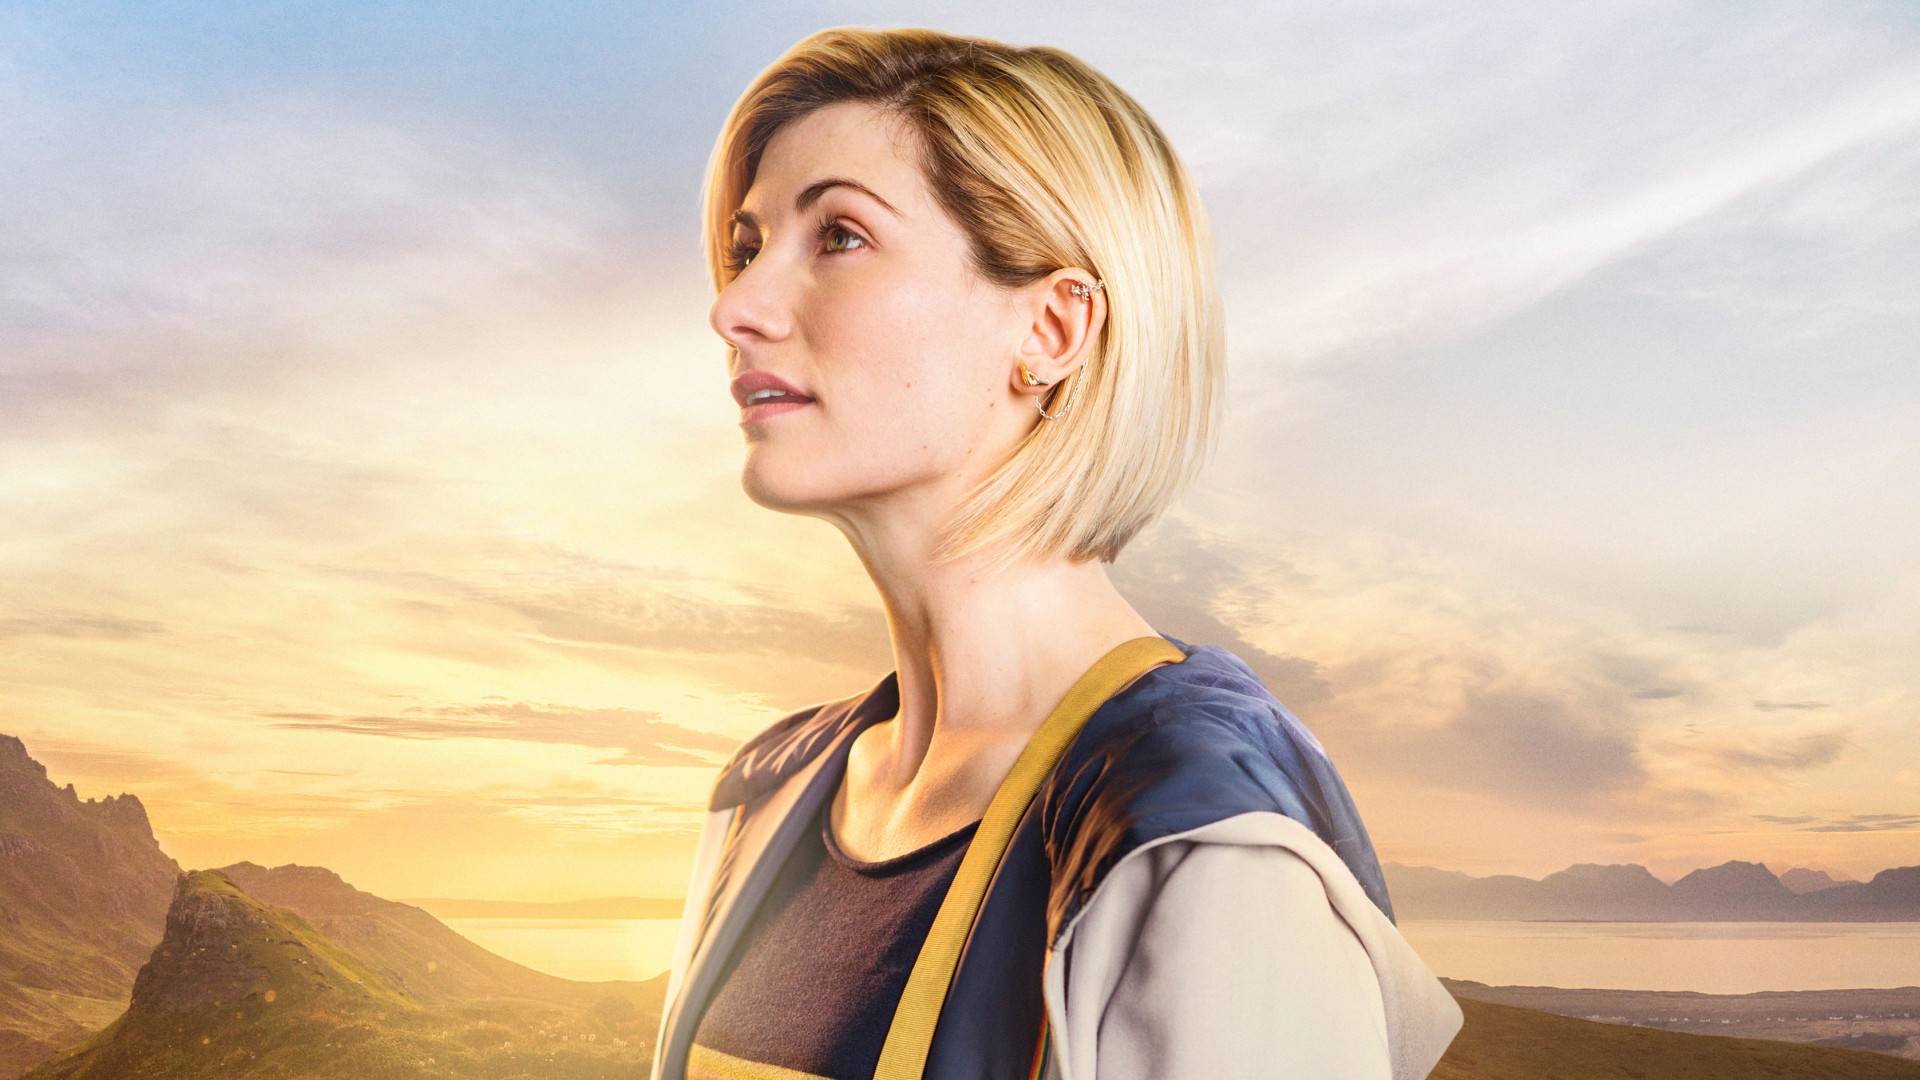 doctor who wallpaper,hair,sky,beauty,hairstyle,blond